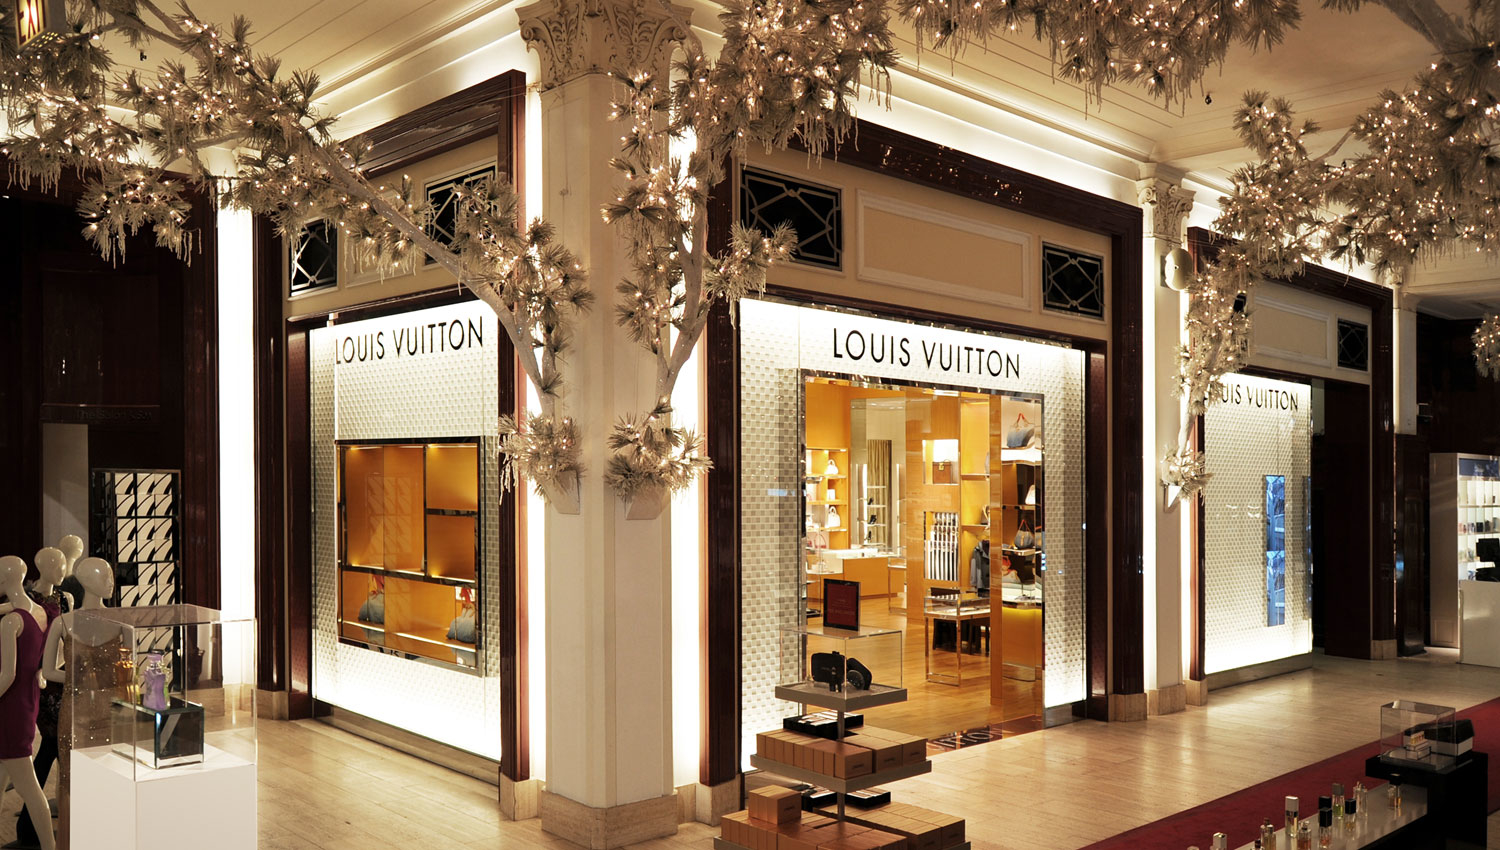 Louis Vuitton Boutique New York | Confederated Tribes of the Umatilla Indian Reservation